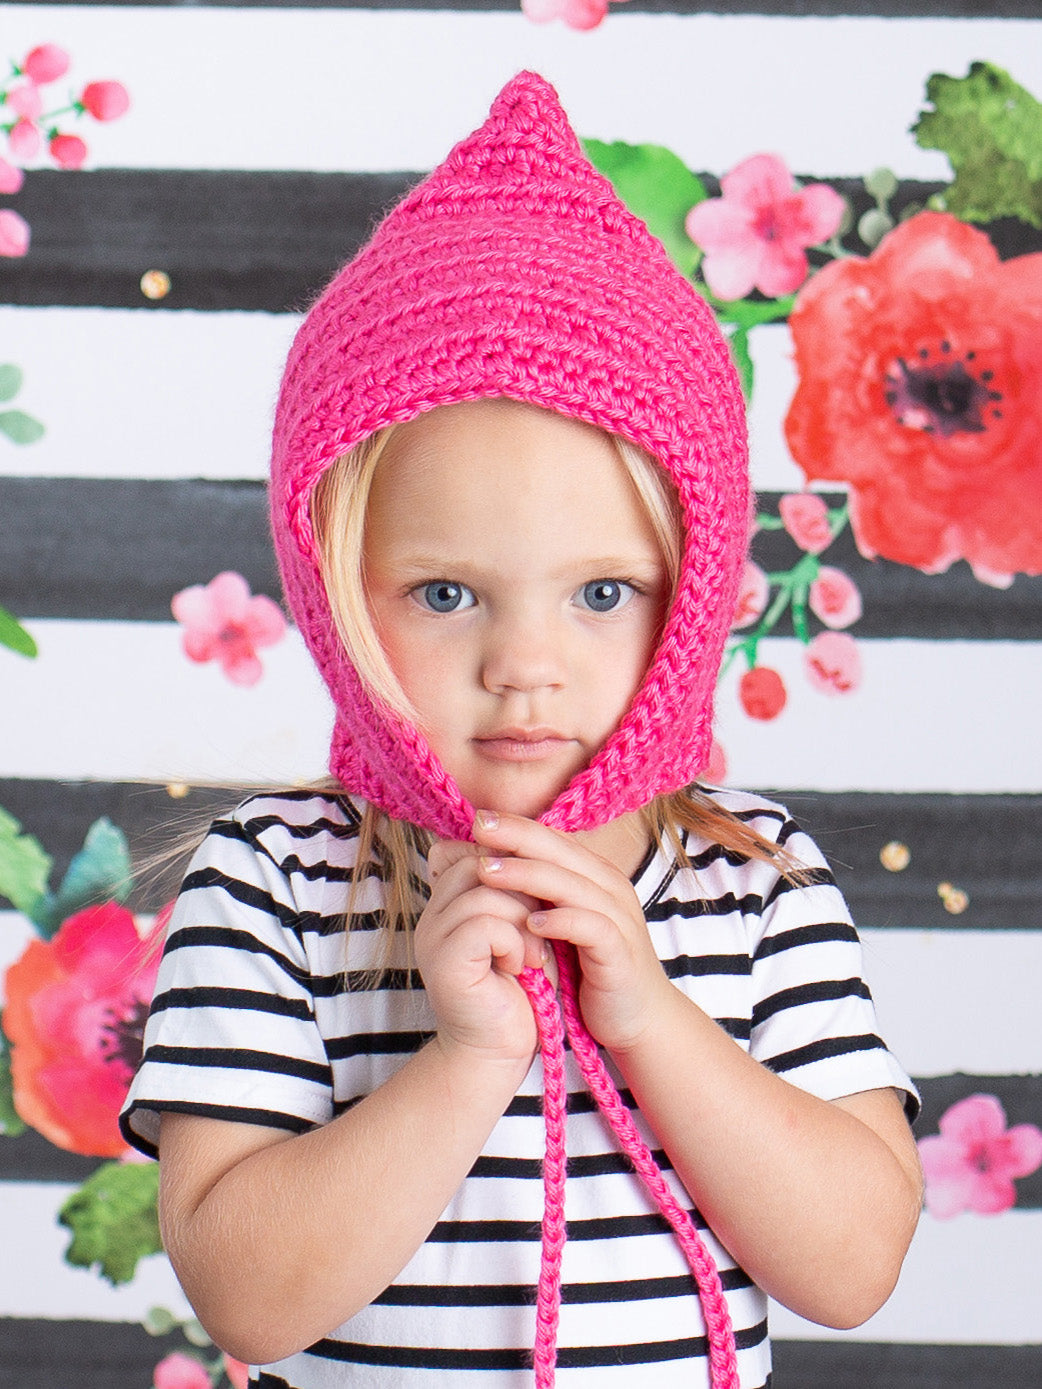 Hot pink pixie elf hat by Two Seaside Babes